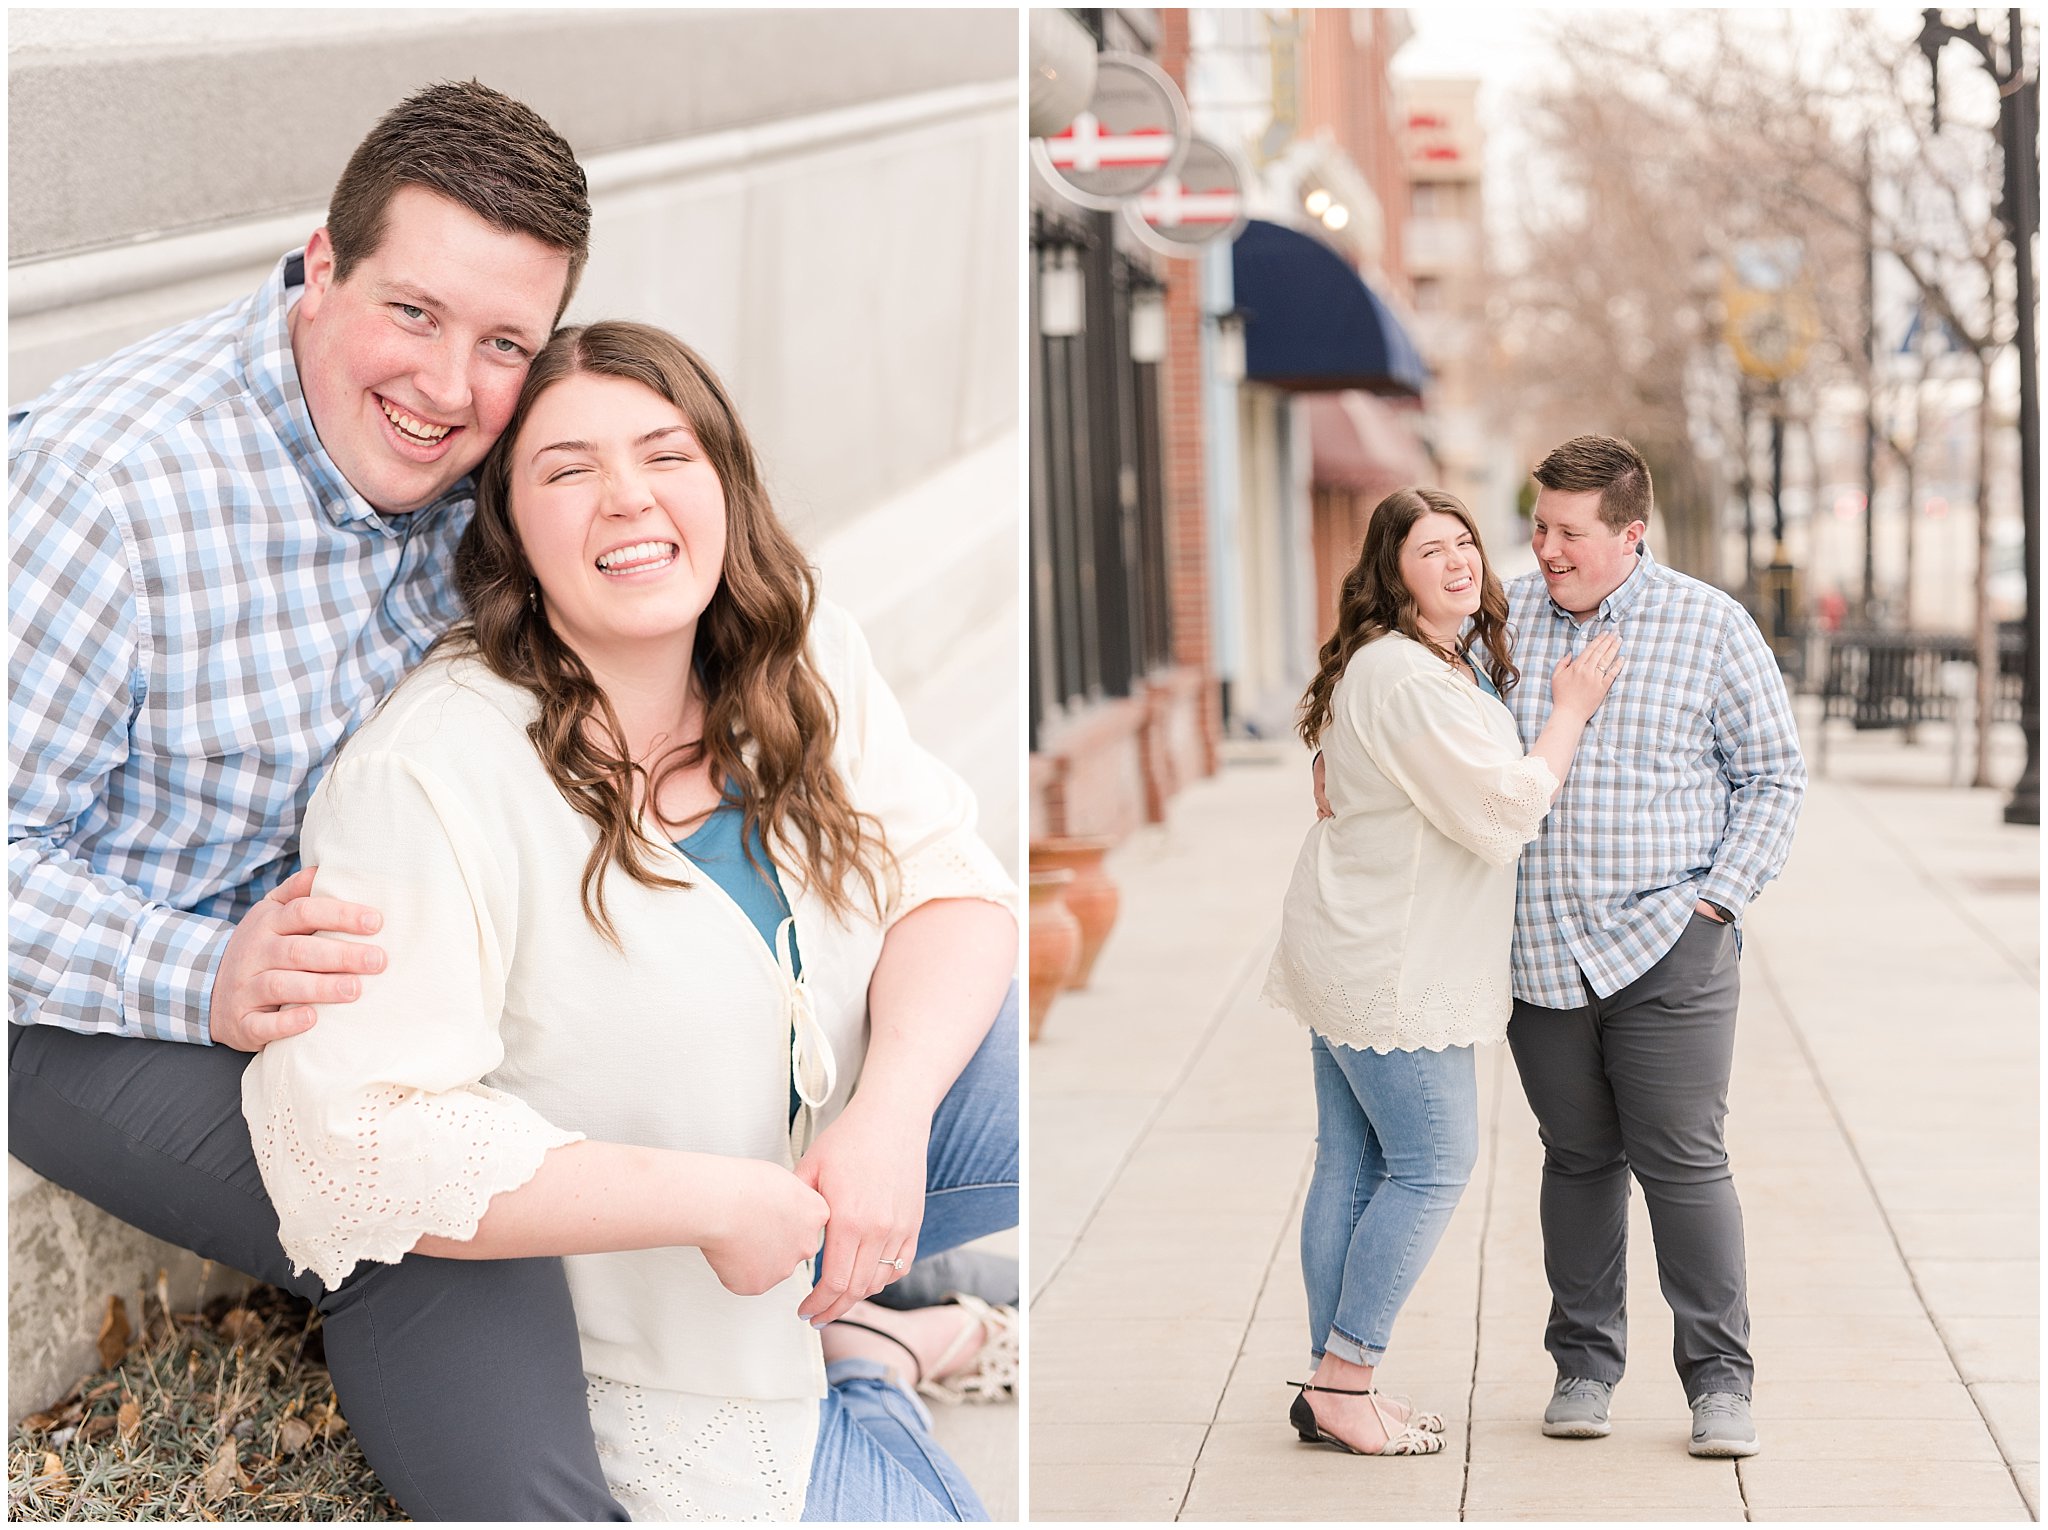 Couple laughing dressed in light blue and white urban engagements | Downtown Logan and Green Canyon Engagements | Utah Wedding Photographers | Jessie and Dallin Photography